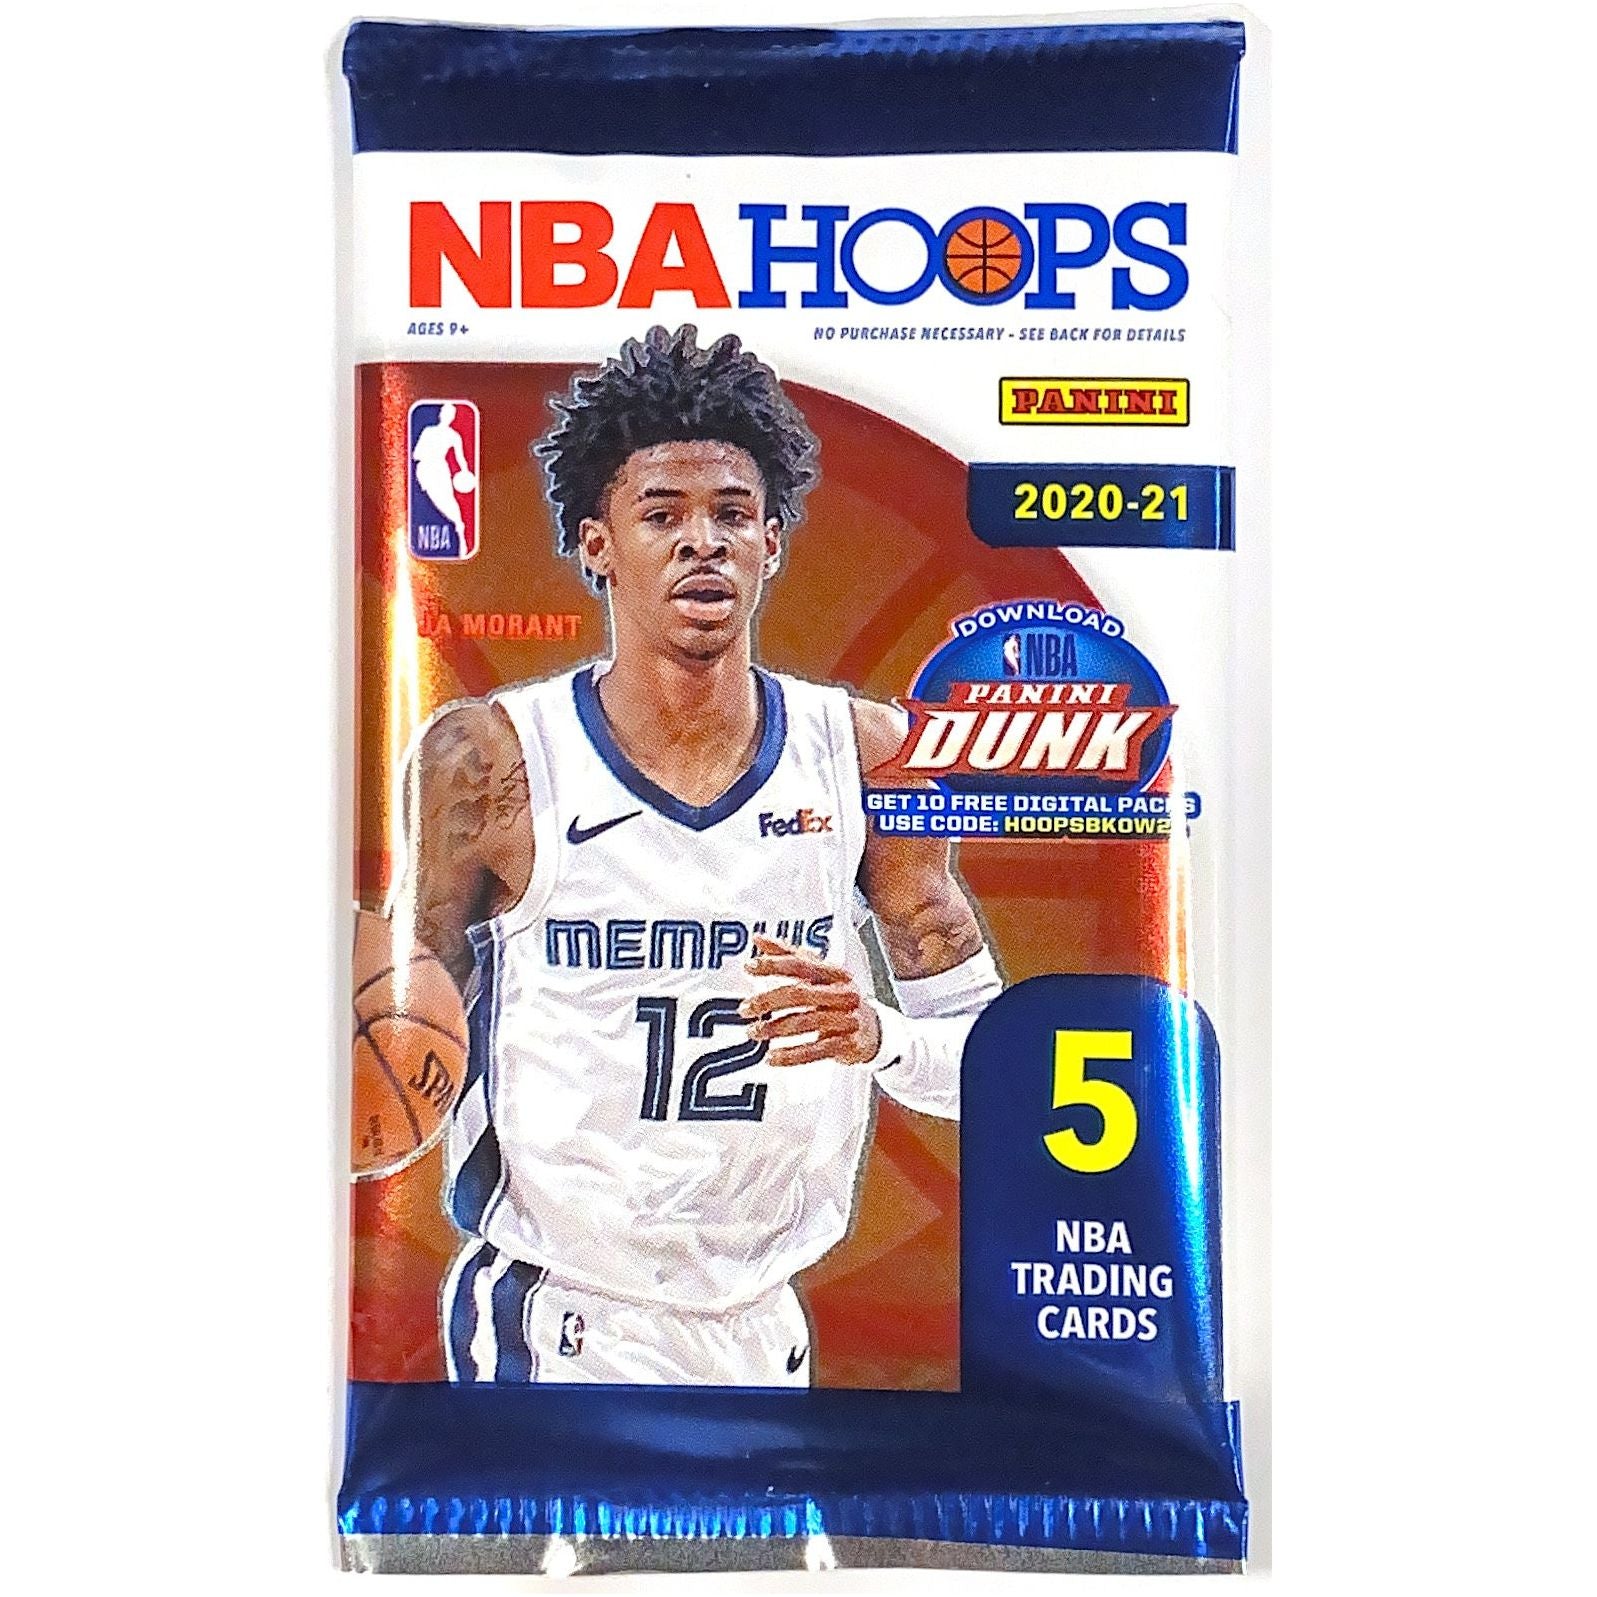  Copy of 2020-21 Panini NBA Hoops Basketball Pack  Local Legends Cards & Collectibles